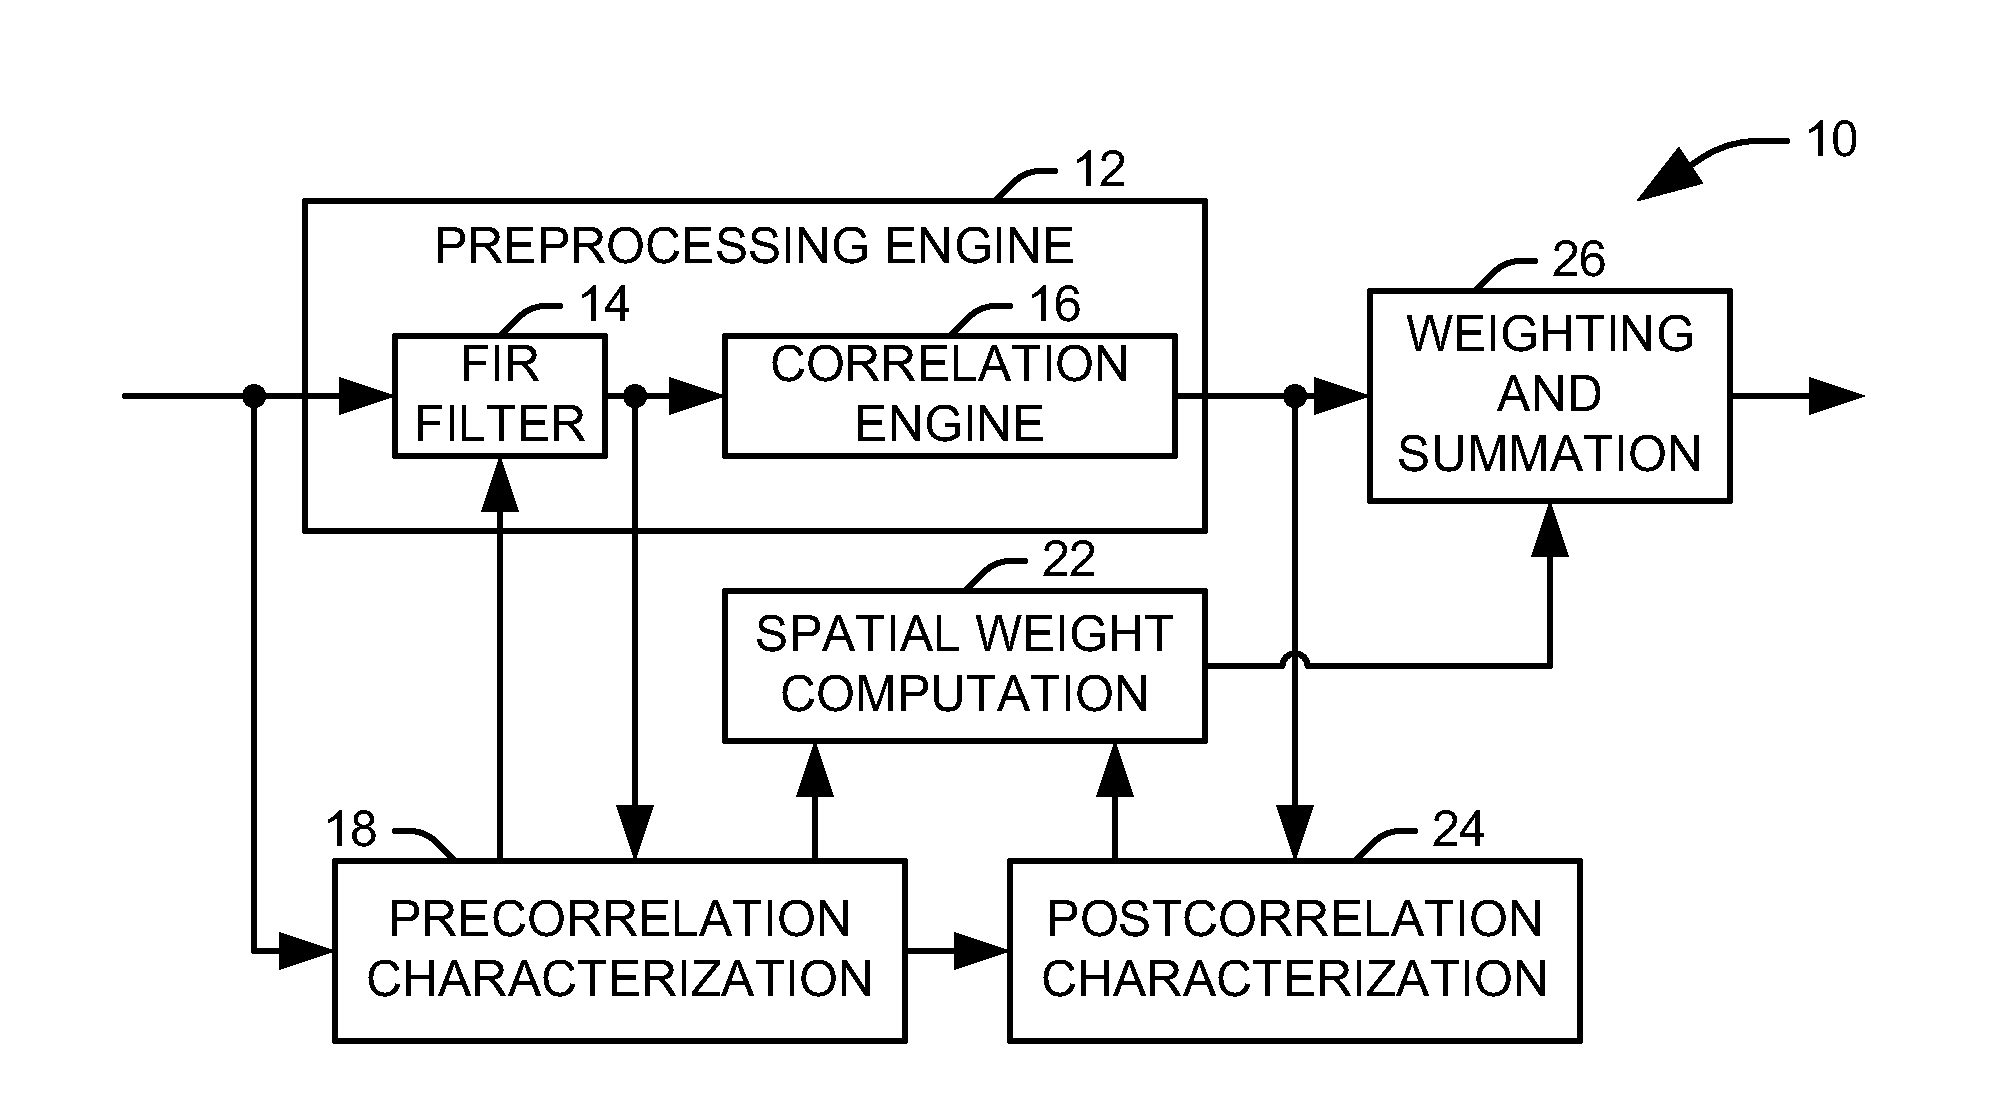 Digital beamforming for simultaneously mitigating weak and strong interference in a navigation system